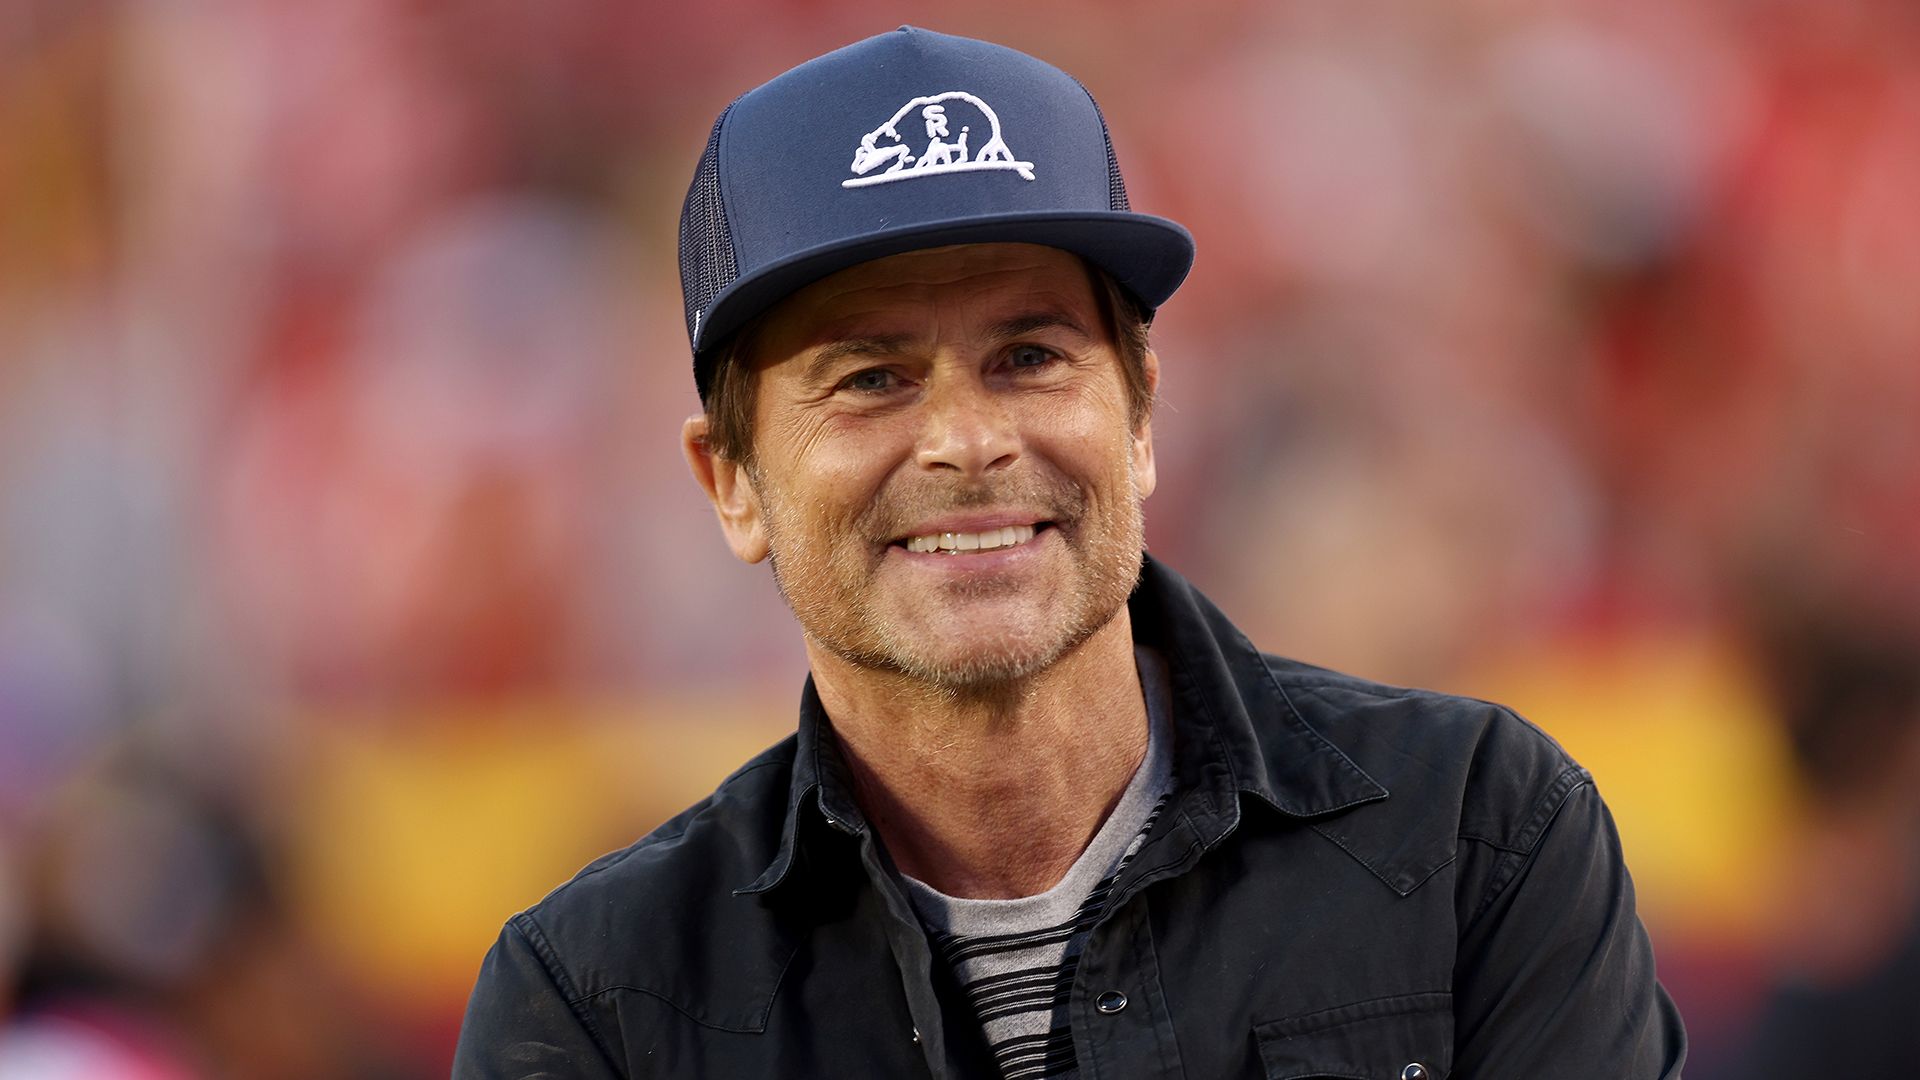 Rob Lowe at 60: actor's then-and-now photos are unbelievable